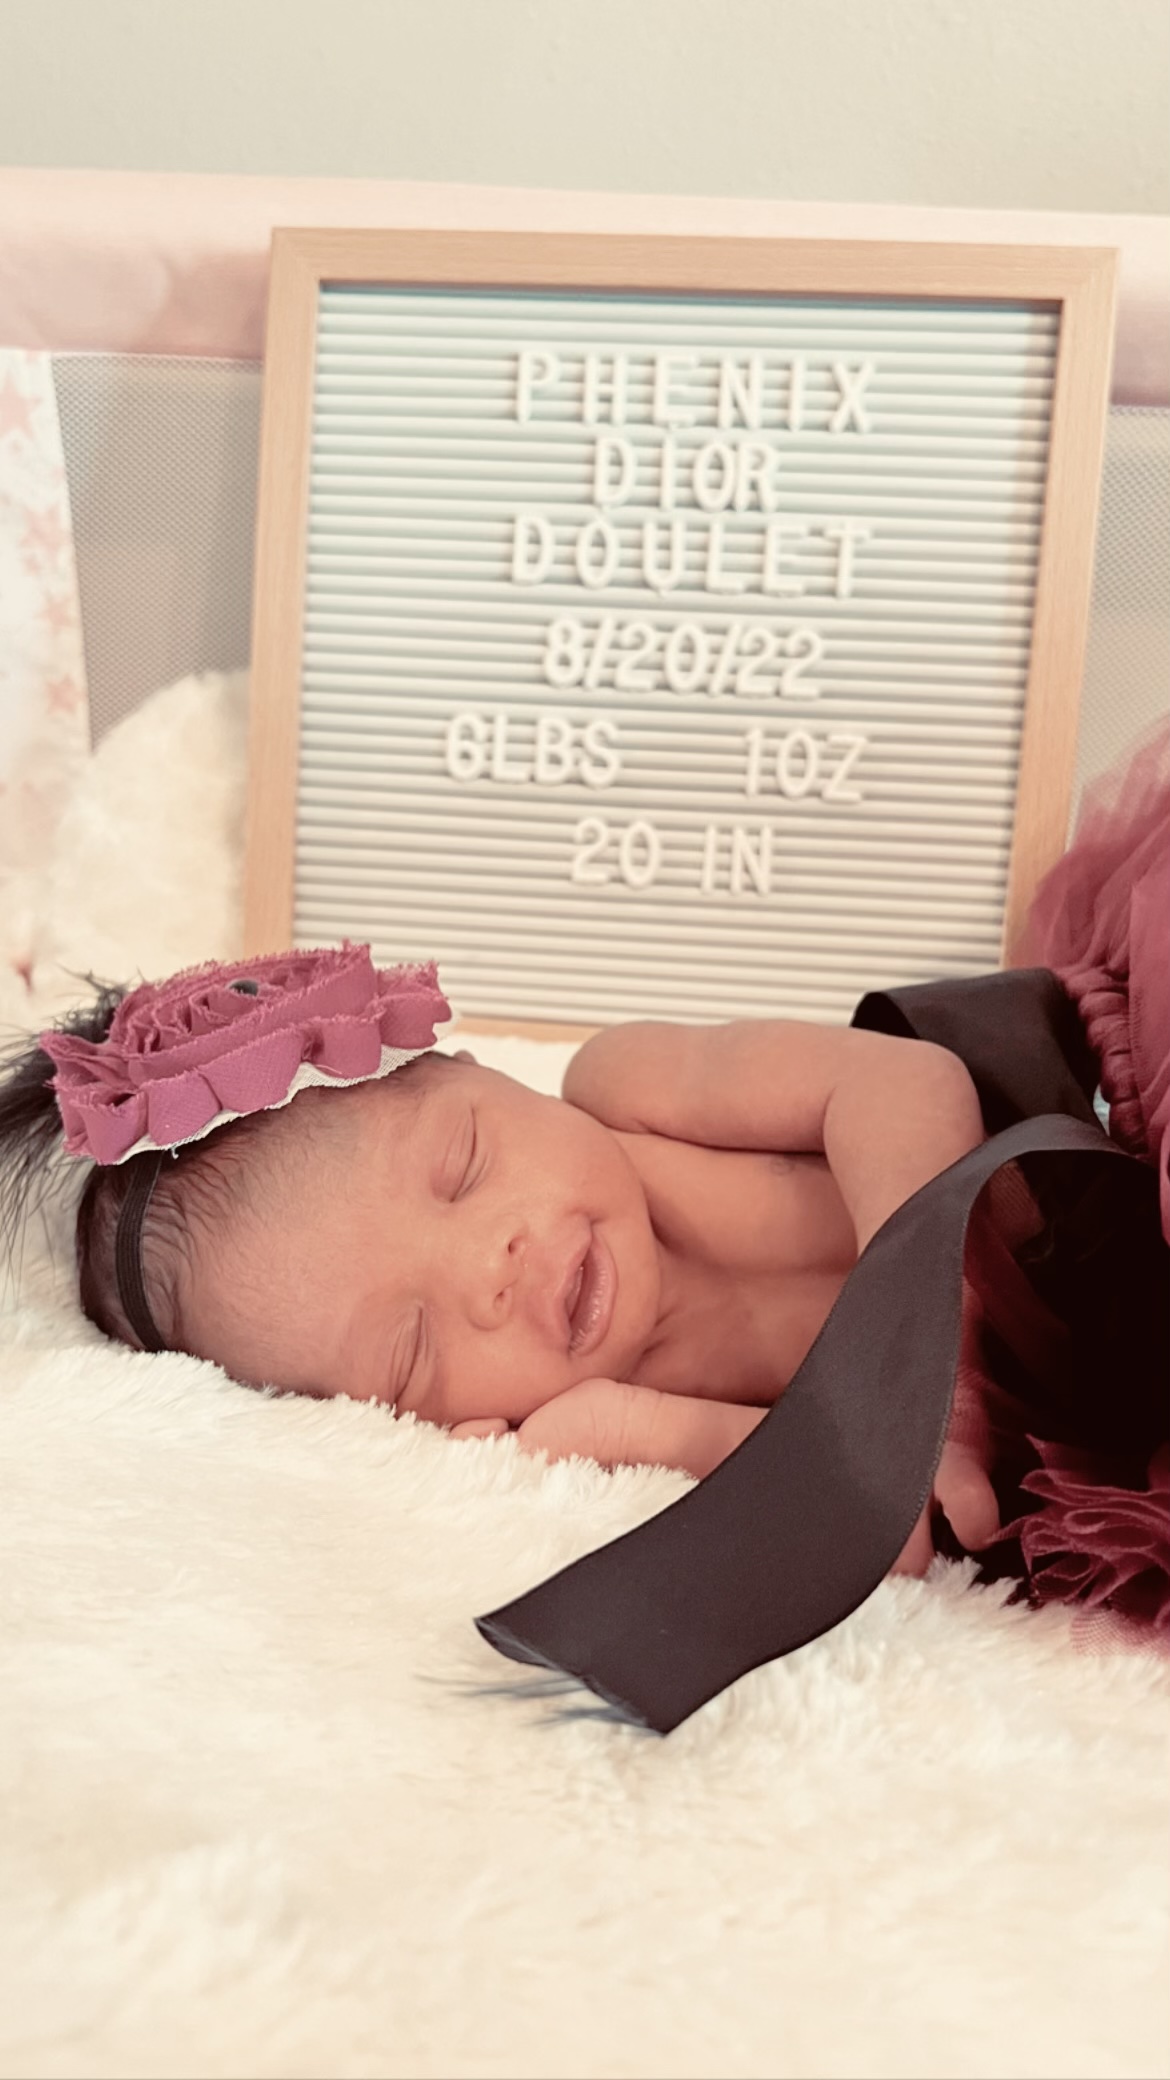 newborn tr baby girl named phenix sleeping with a birth announcement board behind her